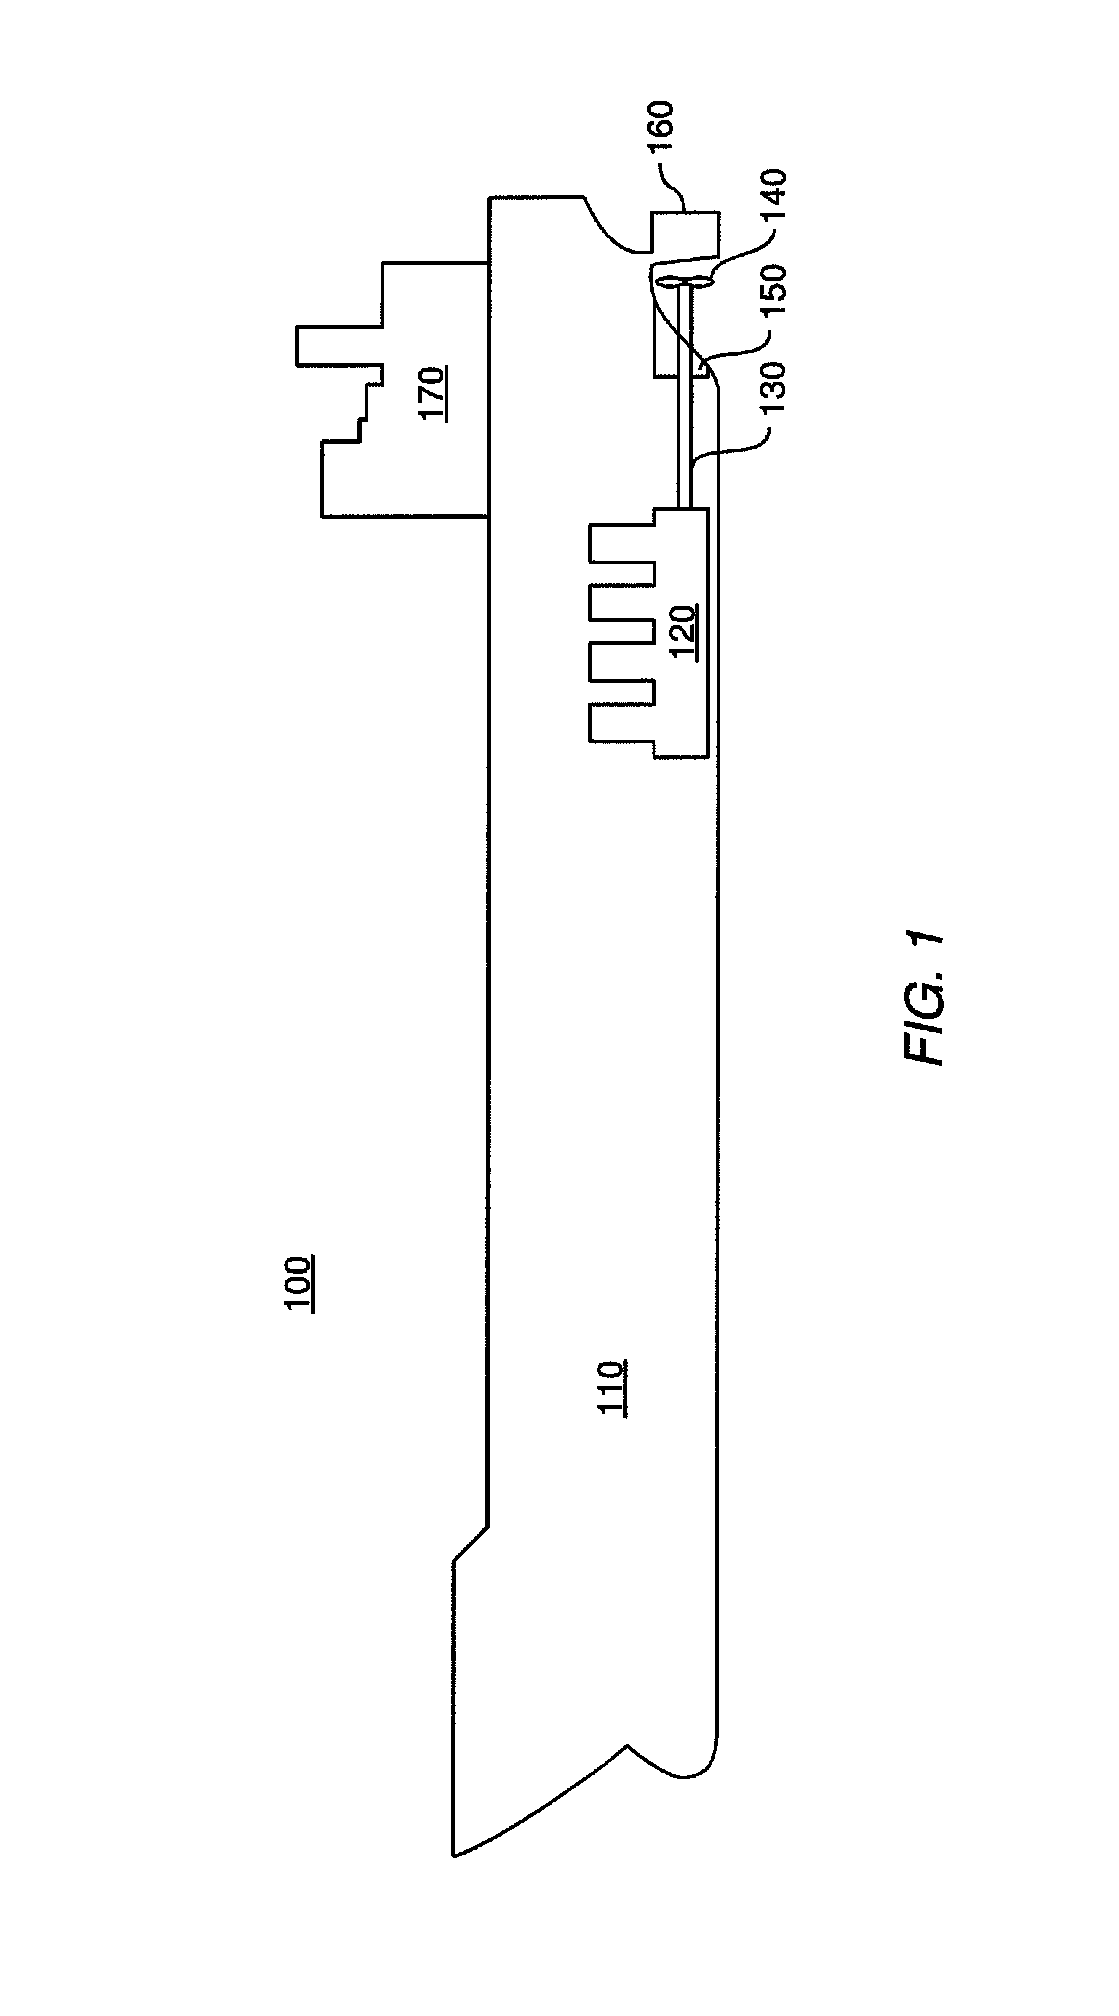 Method, apparatus and system for reducing vibration in a rotary system of a watercraft